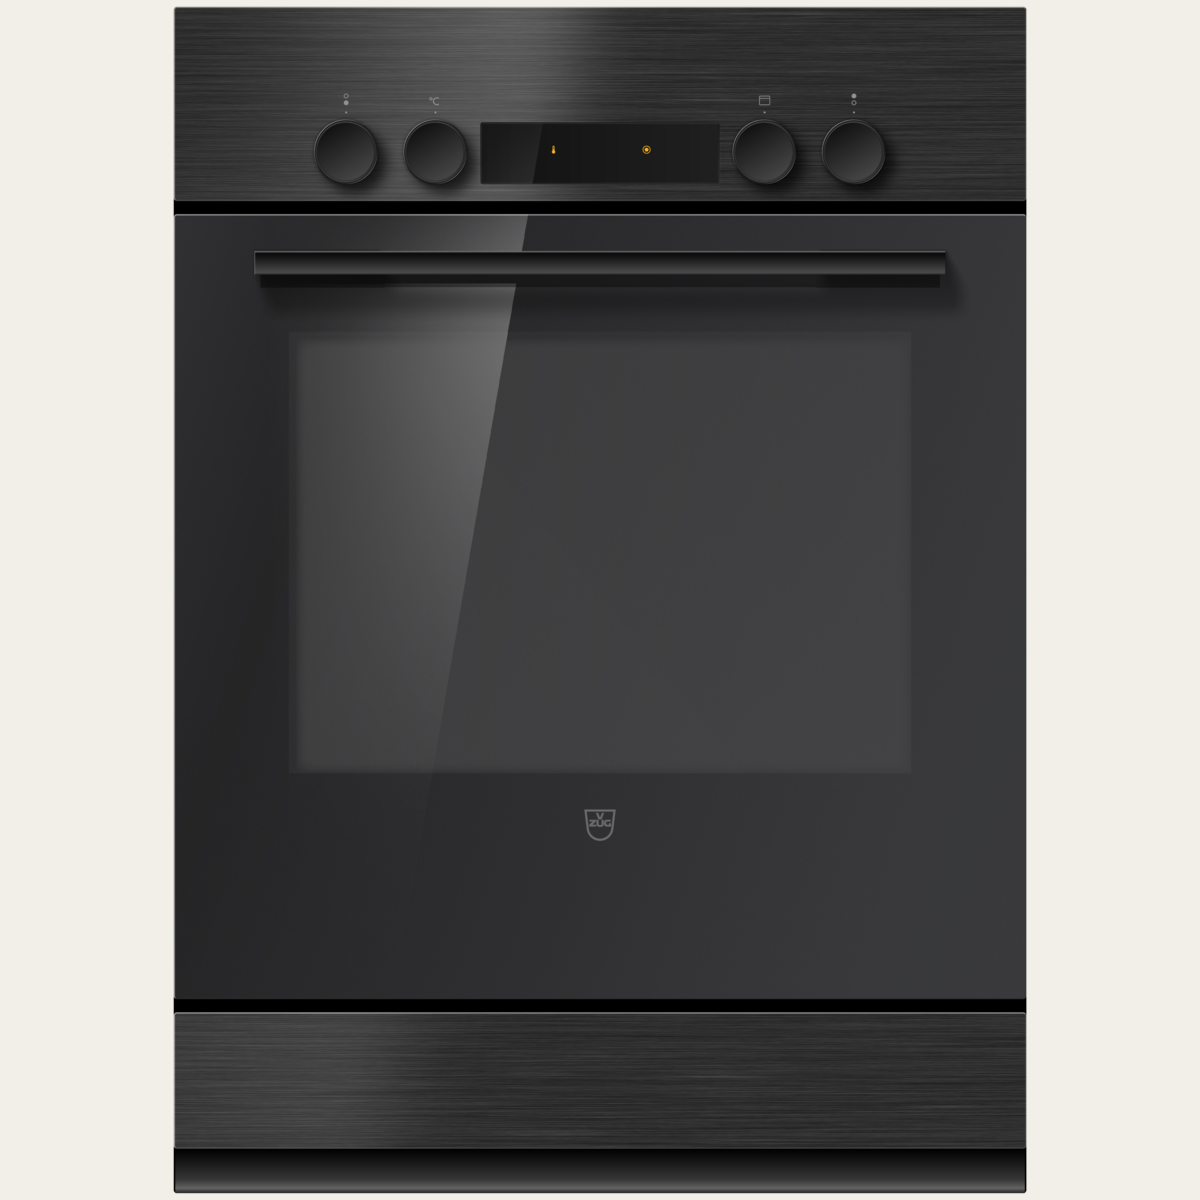 V-ZUG Cooker Combair V200 7UHC, Standard width: 55 cm, Standard height: 76.2 cm, Nero, Handle: Nero, dial, Appliance drawer, Number of controllable cooking zones: 2